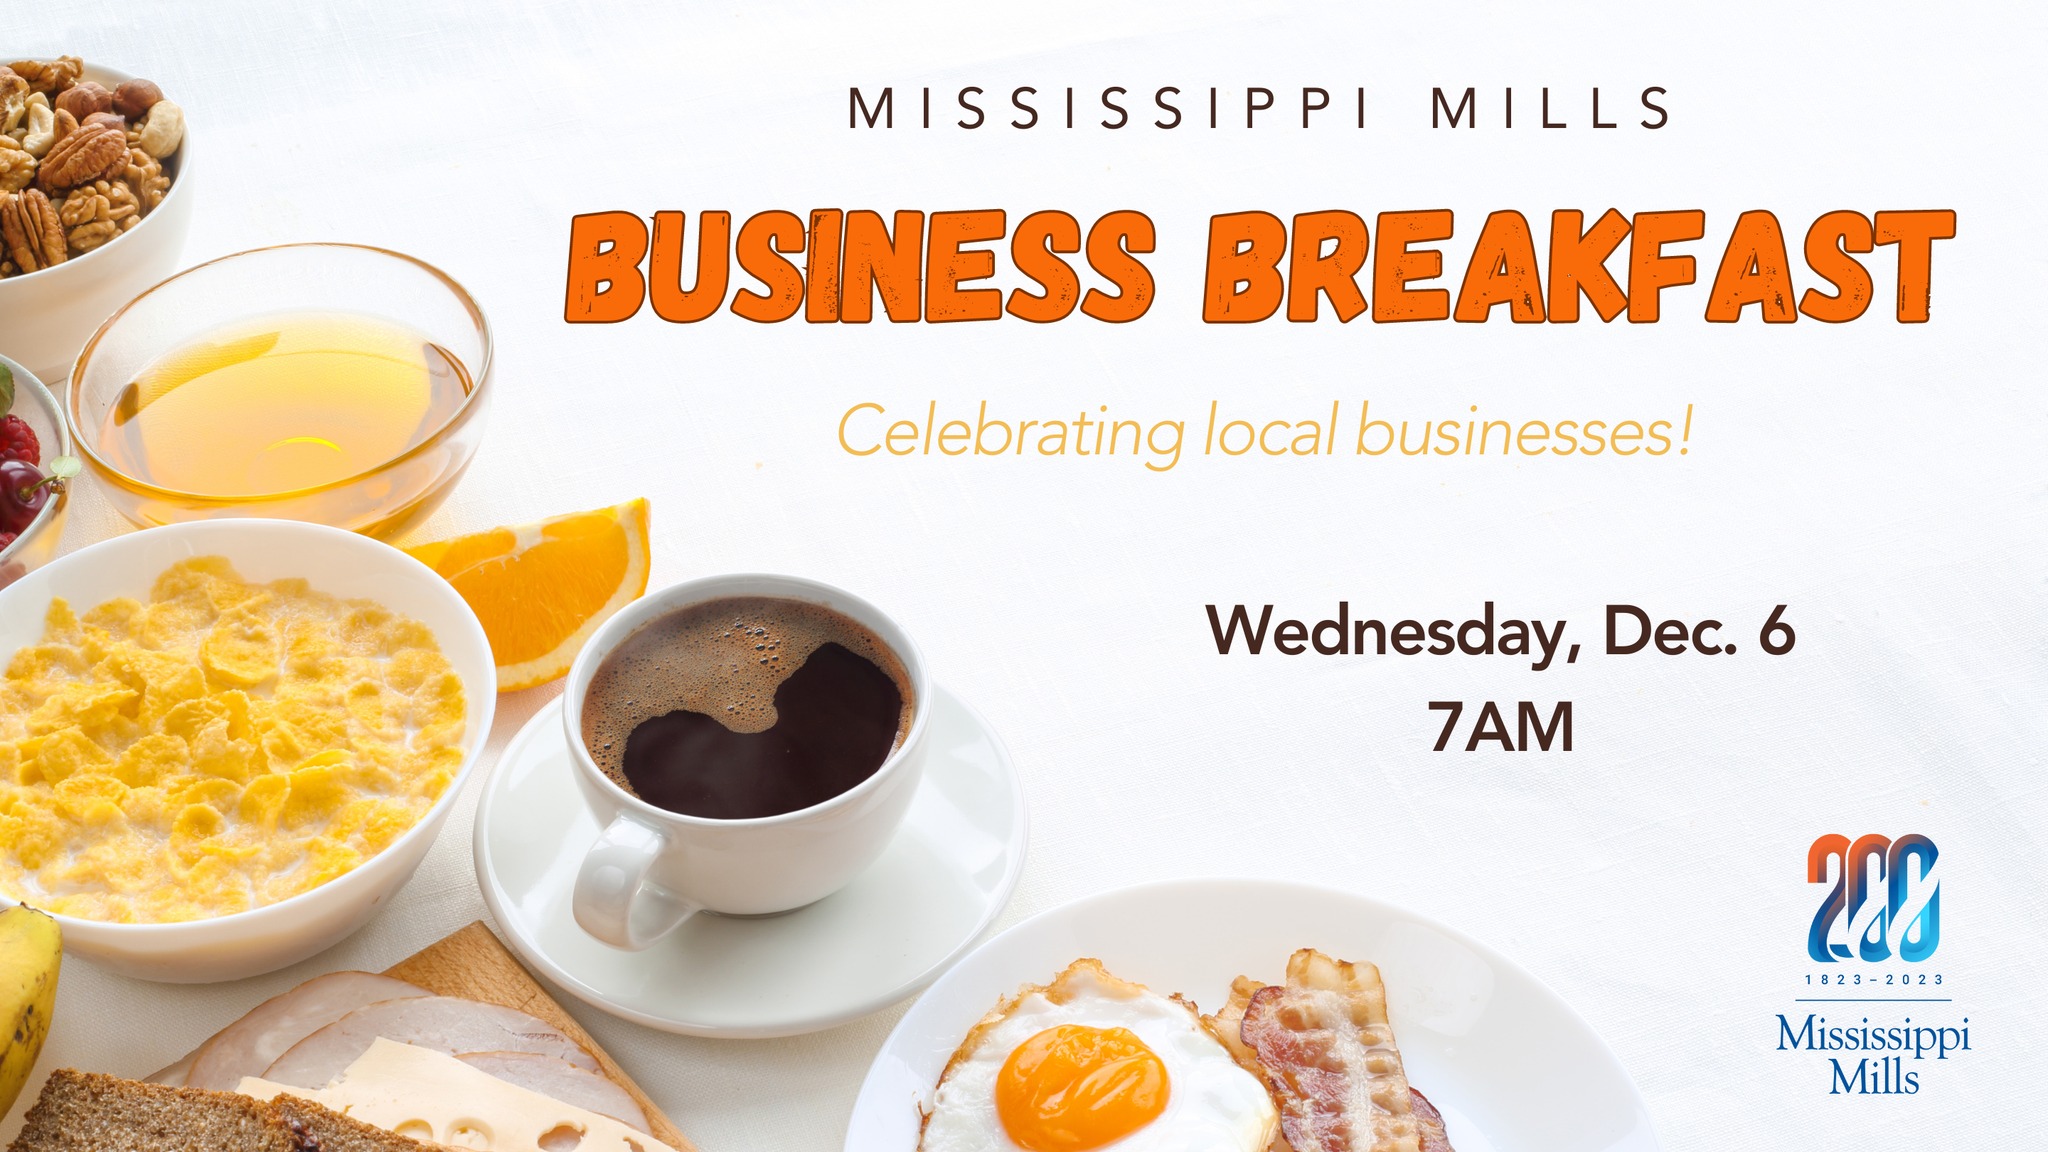 Graphic featuring photo of breakfast on a table - cereal, juice, coffee - with text stating 'Mississippi Mills Business Breakfast'